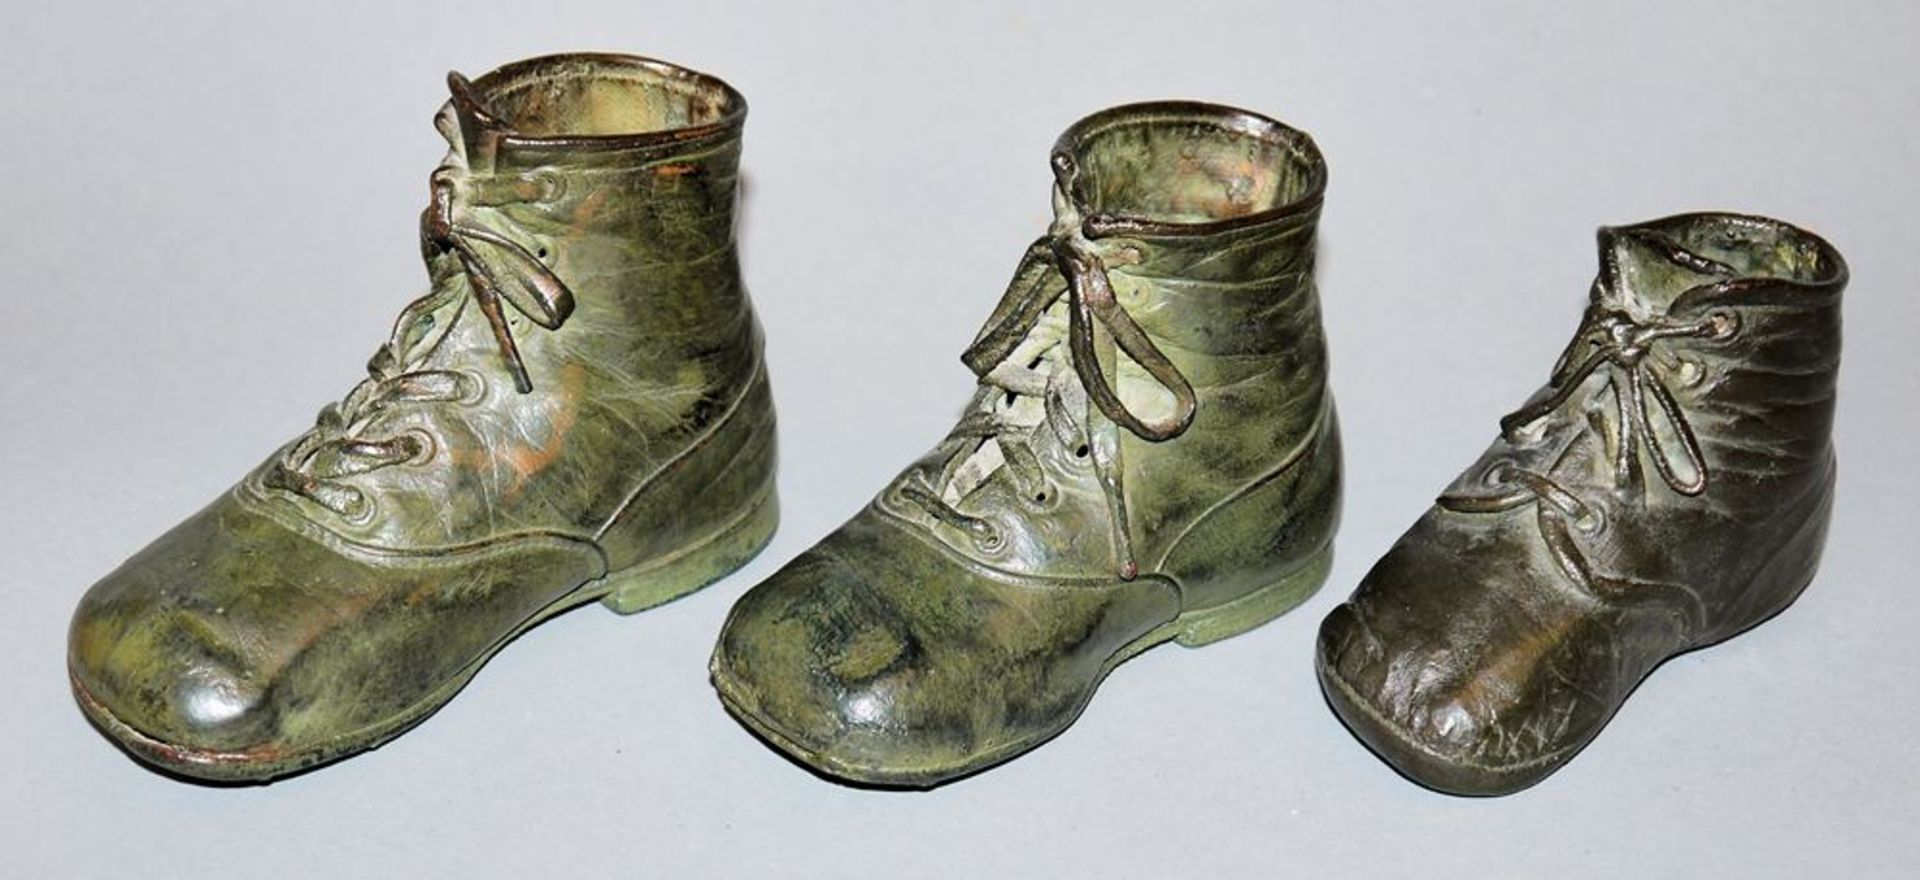 Three "first shoes", galvanically copper-plated, early 20th century